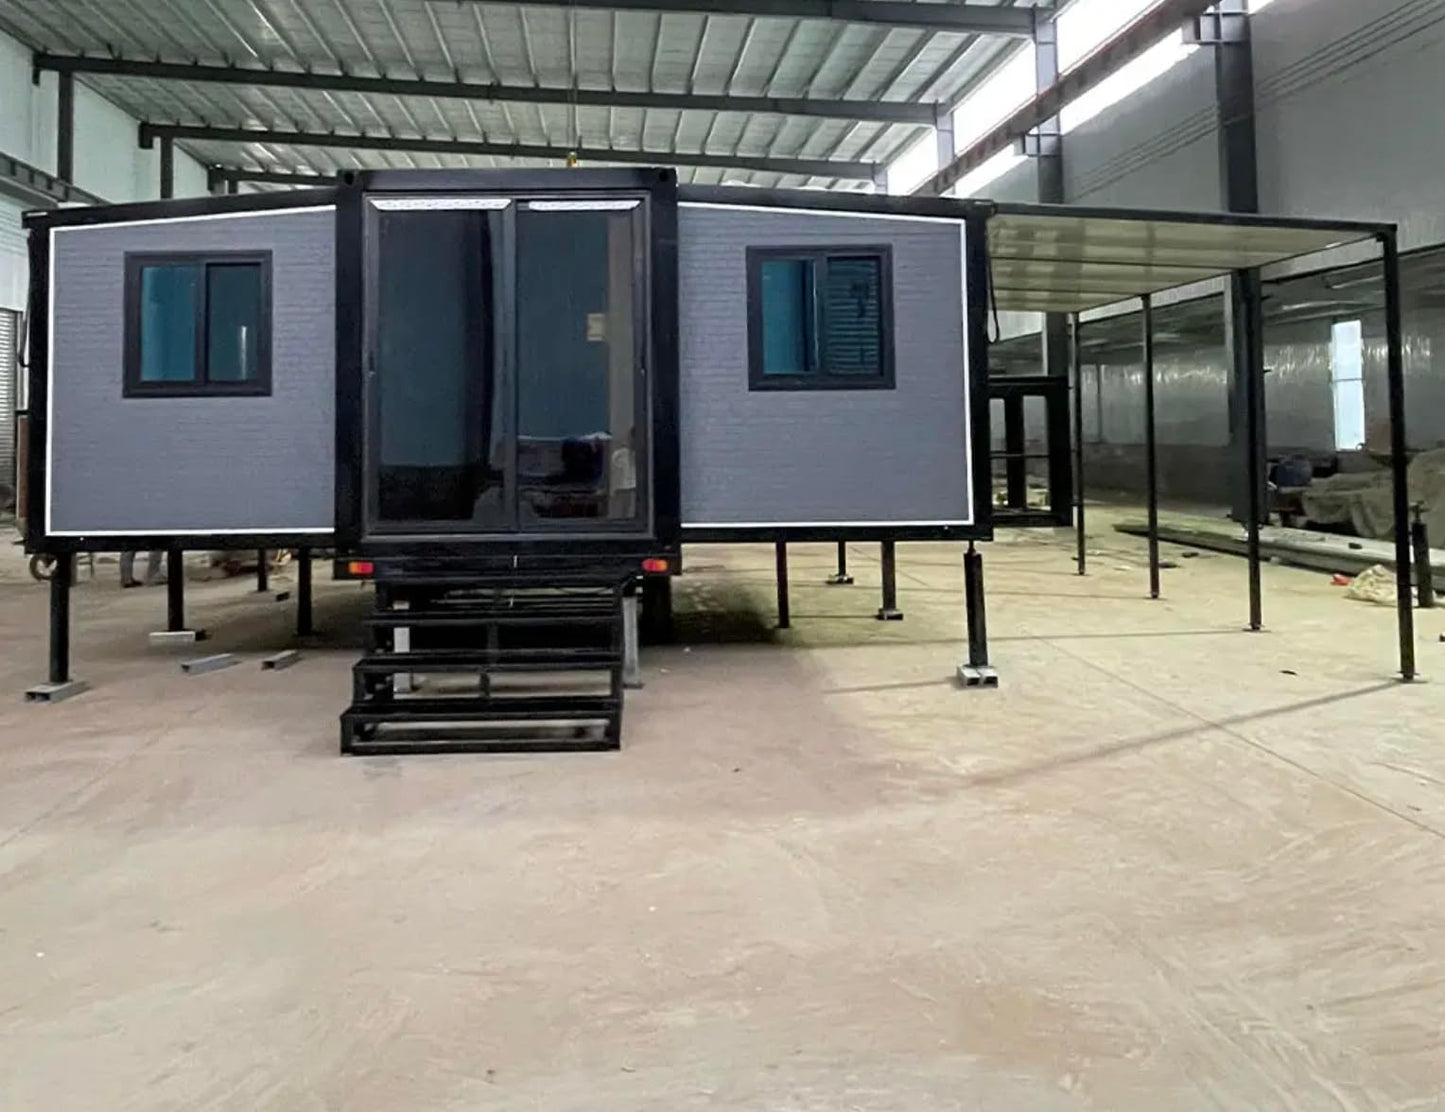 19x20ft Portable Prefabricated Portable House, Light Steel Tiny House Kit, Fully Equipped, Mobile Home for Vacation, Temporary Home, Office, Hotel, Villa (19x20ft - 2 Bedroom, 1 Bath)